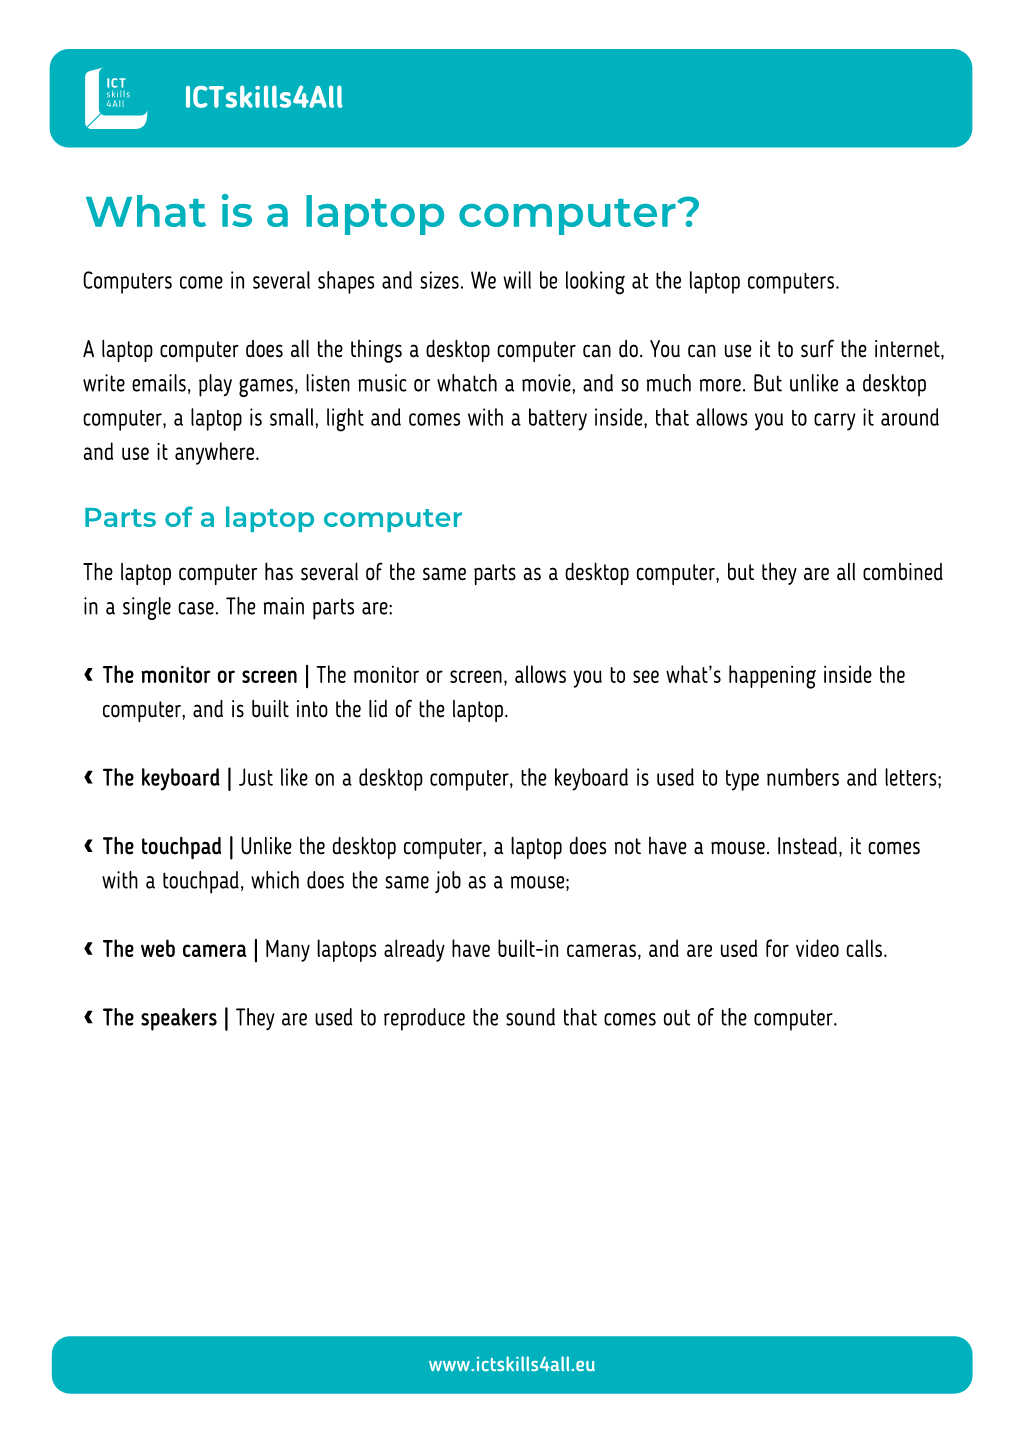 What Is a Laptop Computer?